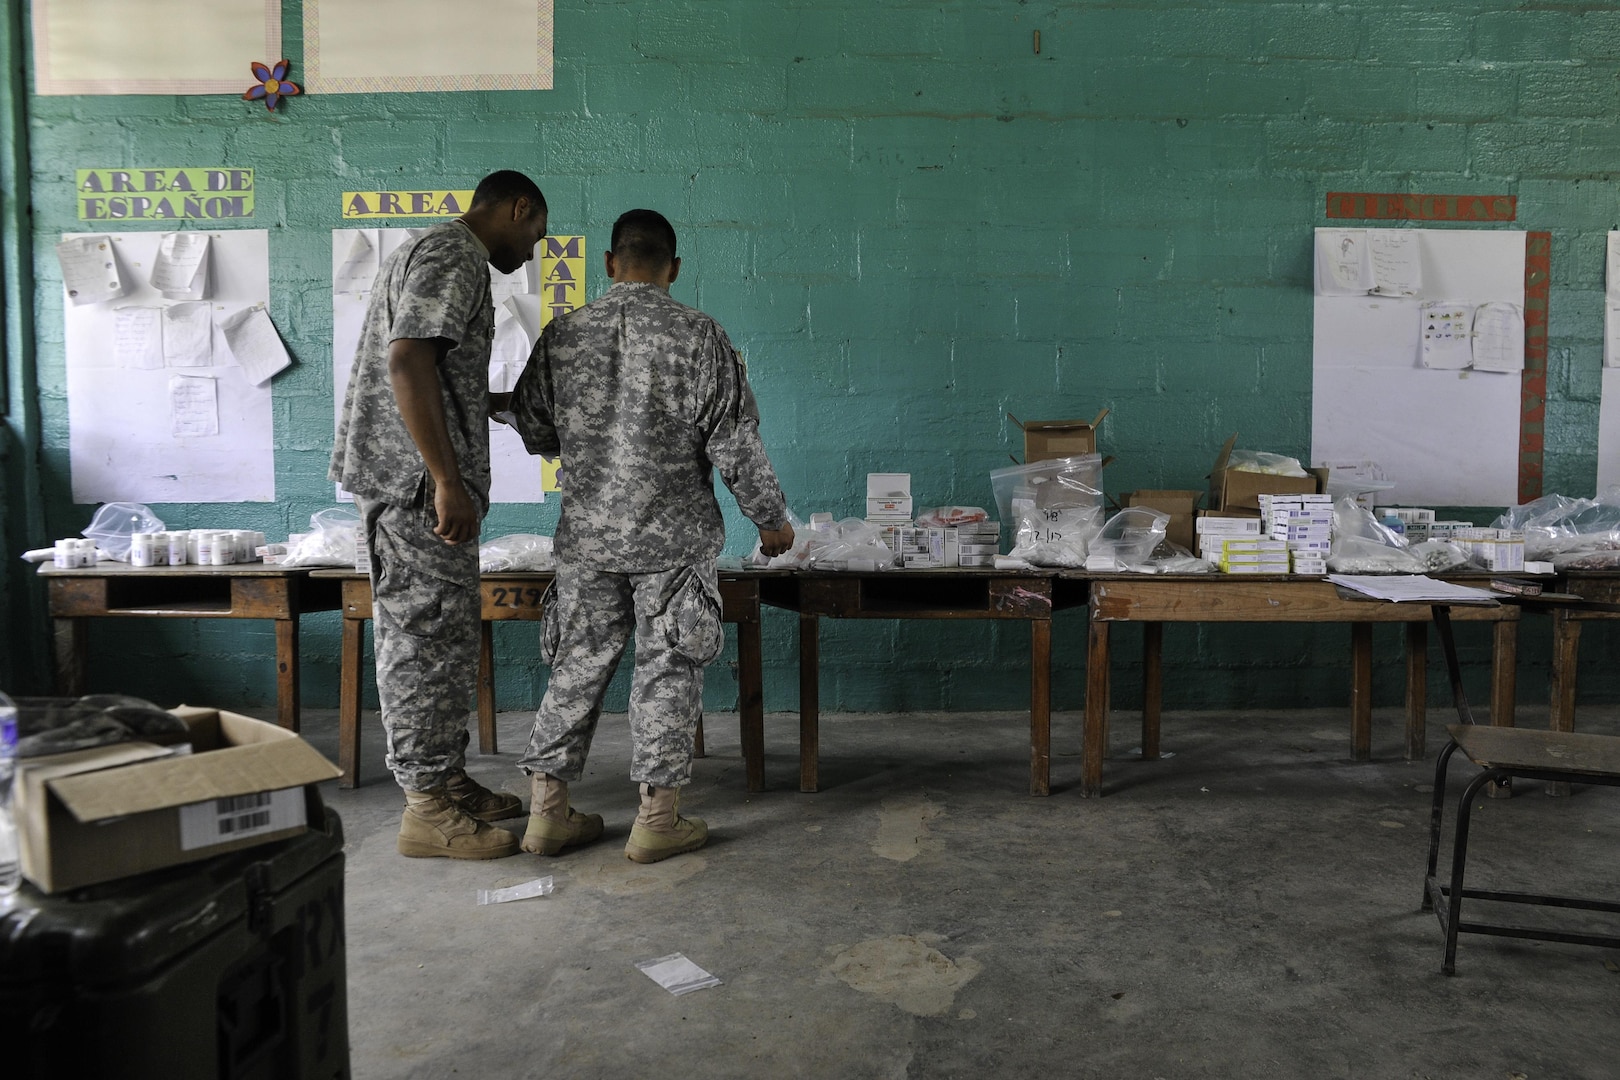 U.S. Army Spc. Joshua Miller, Joint Task Force-Bravo Medical Element medical logistics specialist, and Sgt. Jeffry Gomez, JTF-Bravo MEDEL dental technician, fulfill prescription orders during a Medical Readiness Training Exercise operation in Trujillo, Honduras, July 29, 2016. During MEDRETEs, personnel from every section of MEDEL come together to help accomplish the mission of delivering medical care in austere conditions, promoting diplomatic relations between the U.S. and host nations in Central America, and providing humanitarian and civic assistance via a long-term proactive program. (U.S. Air Force photo by Staff Sgt. Siuta B. Ika)